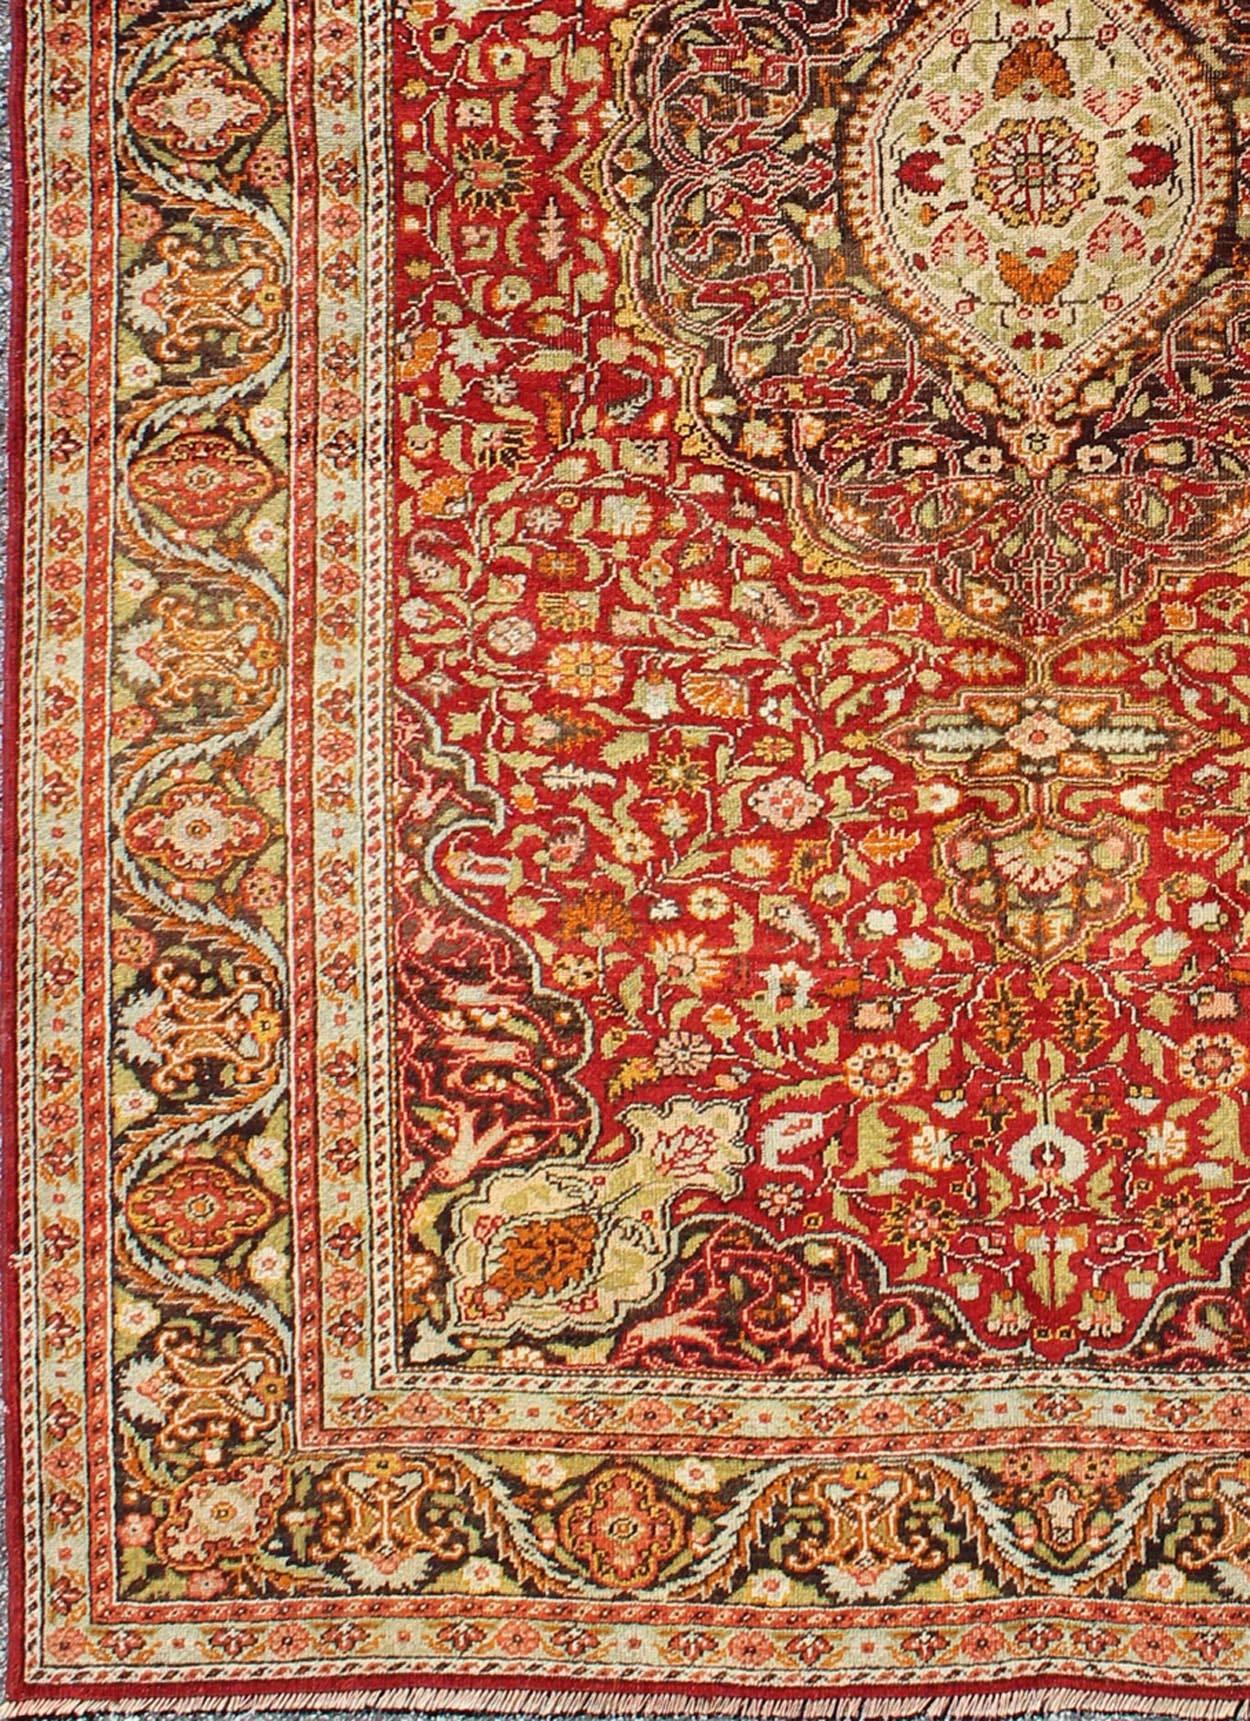 Gorgeous early 20th century Turkish antique Sivas rug with layered medallion and flowers, Keivan Woven Arts / rug 13-0104, country of origin / type: Turkey / Oushak, circa 1920

This sublime and enchanting antique rug, a gorgeous Sivas rug made in